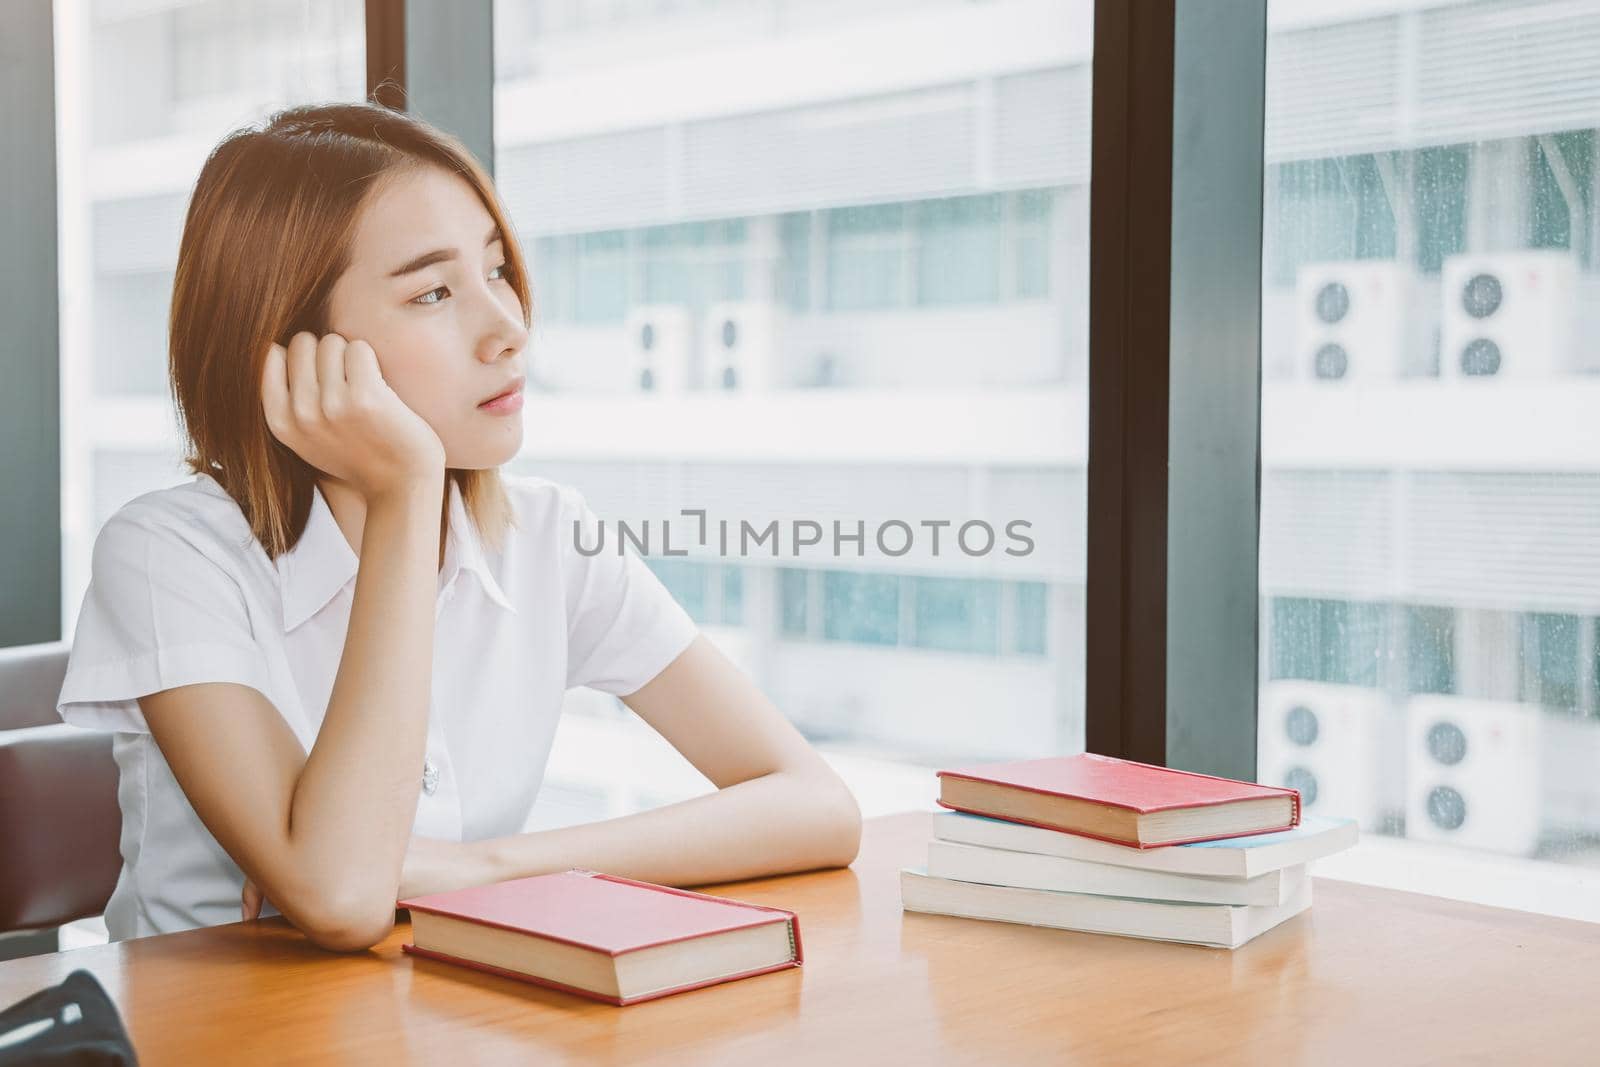 Asian university girl teen sitting alone thinking worry, day dreaming or boring looking out window lonely expression in library.